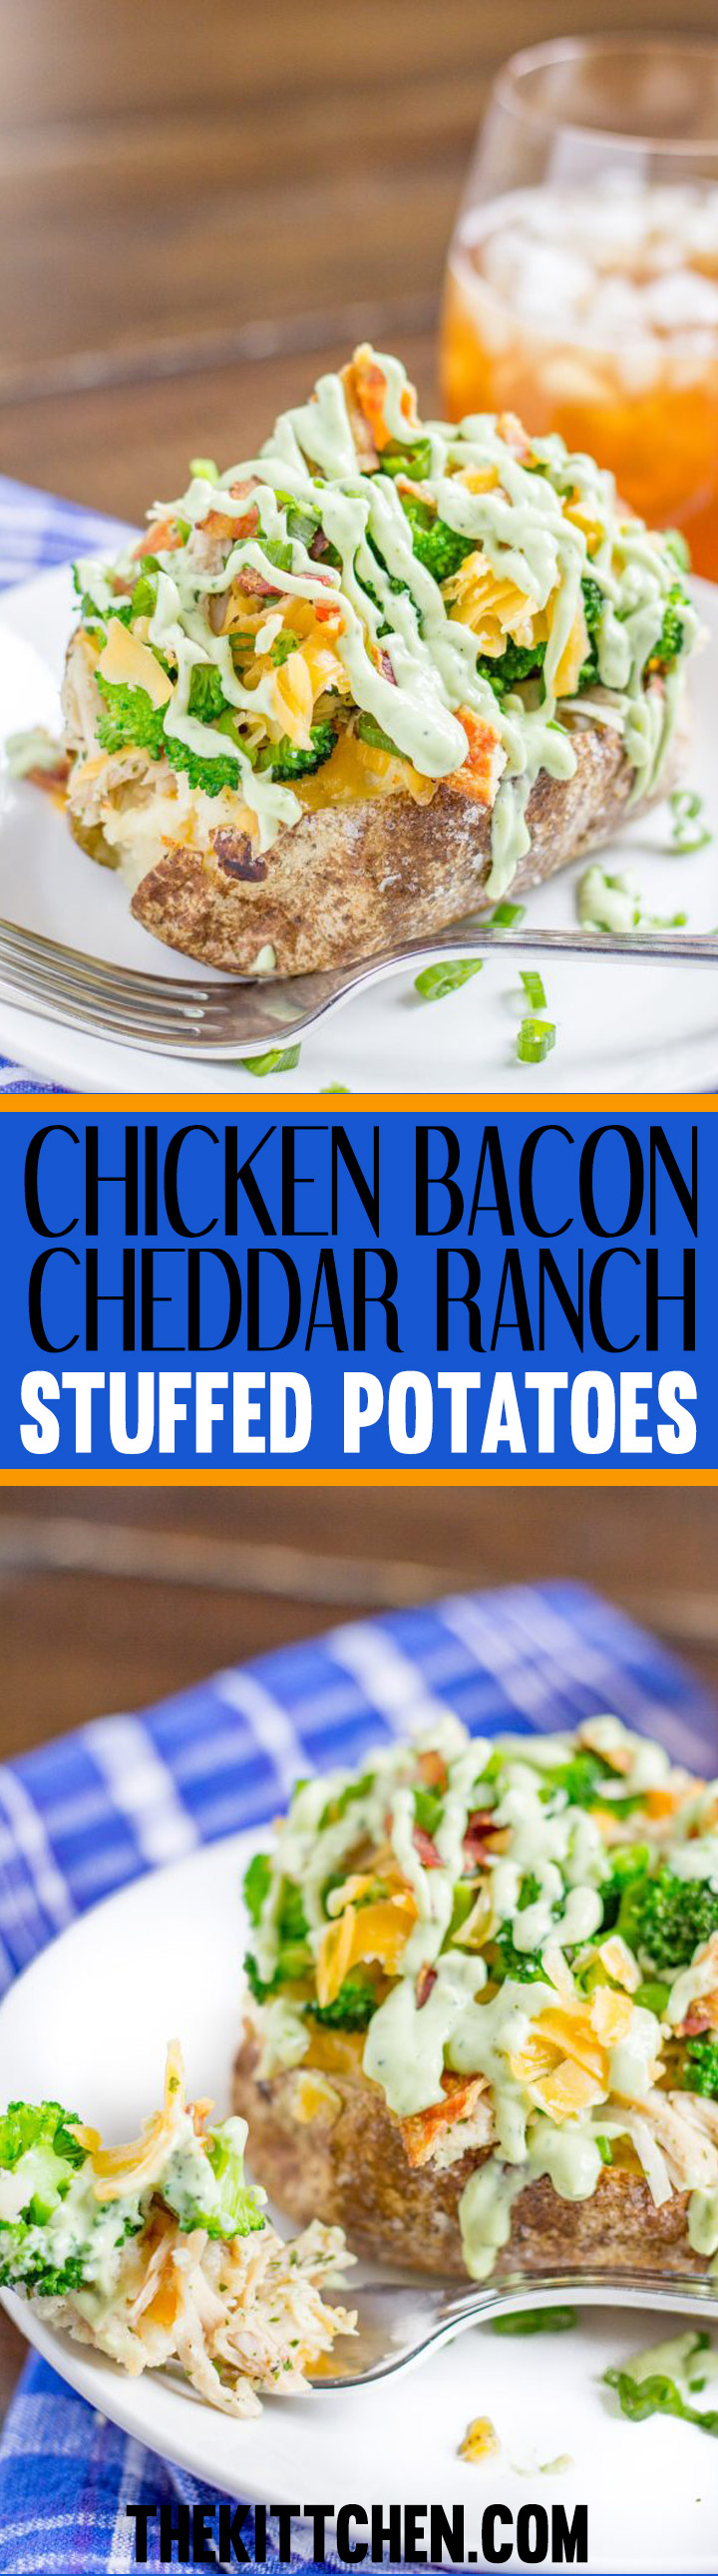 The Best Chicken Bacon Cheddar Ranch Stuffed Potatoes